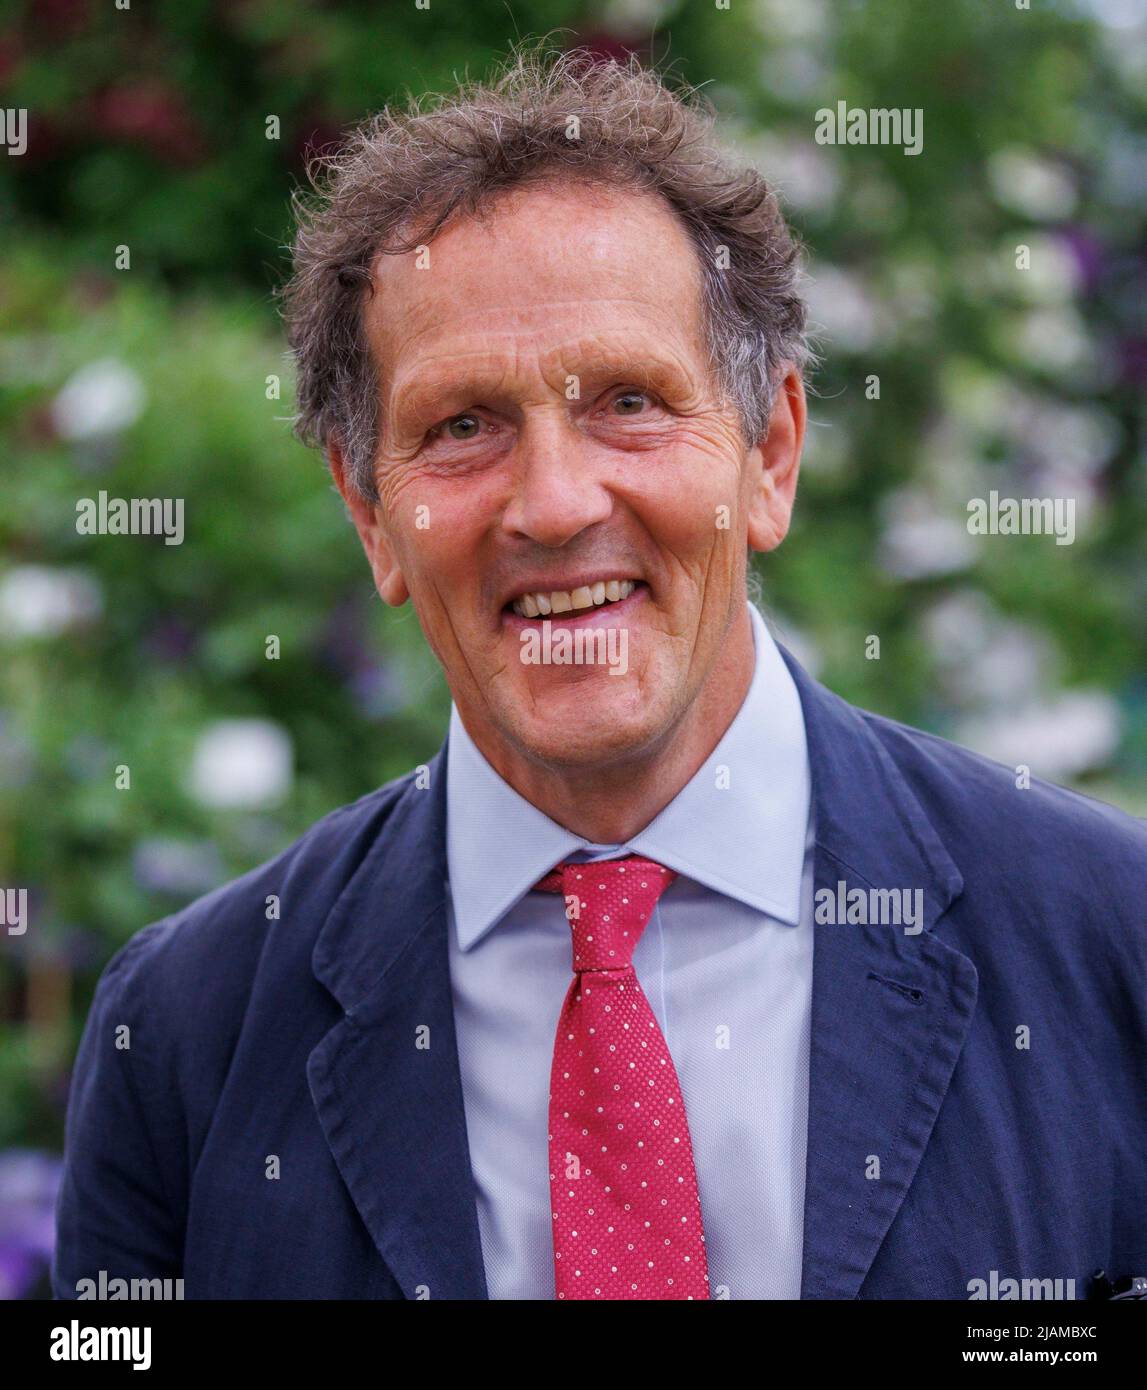 Monty Don, Horticulturalist, broadcaster and writer, at the RHS Chelsea flower show. He presents Gardeners World. Stock Photo